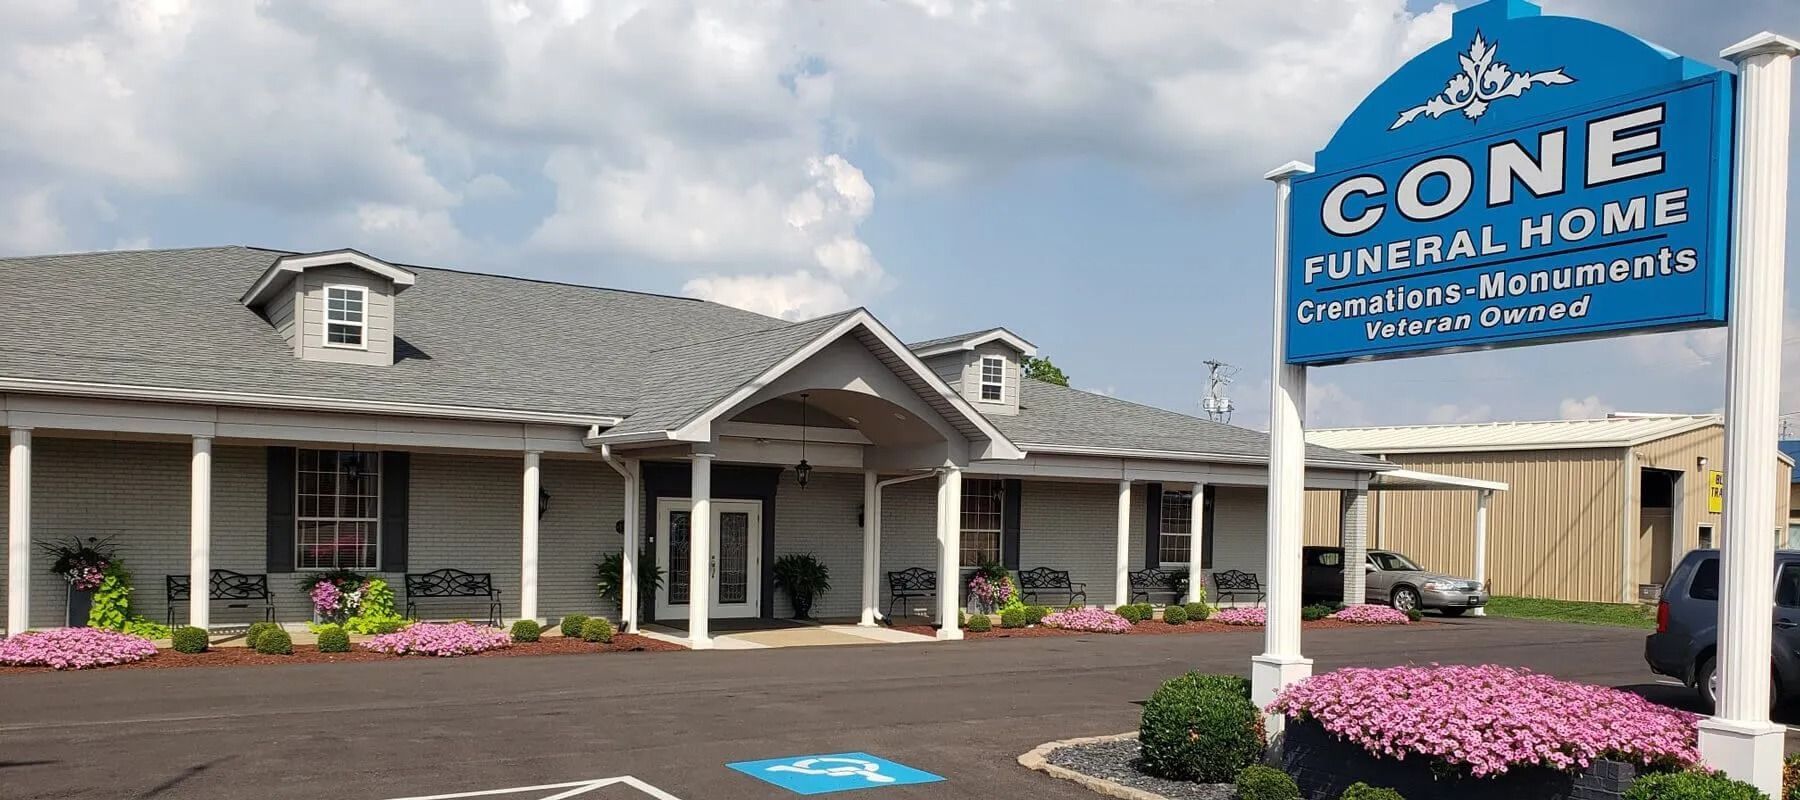 Exterior view of Cone Funeral Home in Bowling Green, KY.